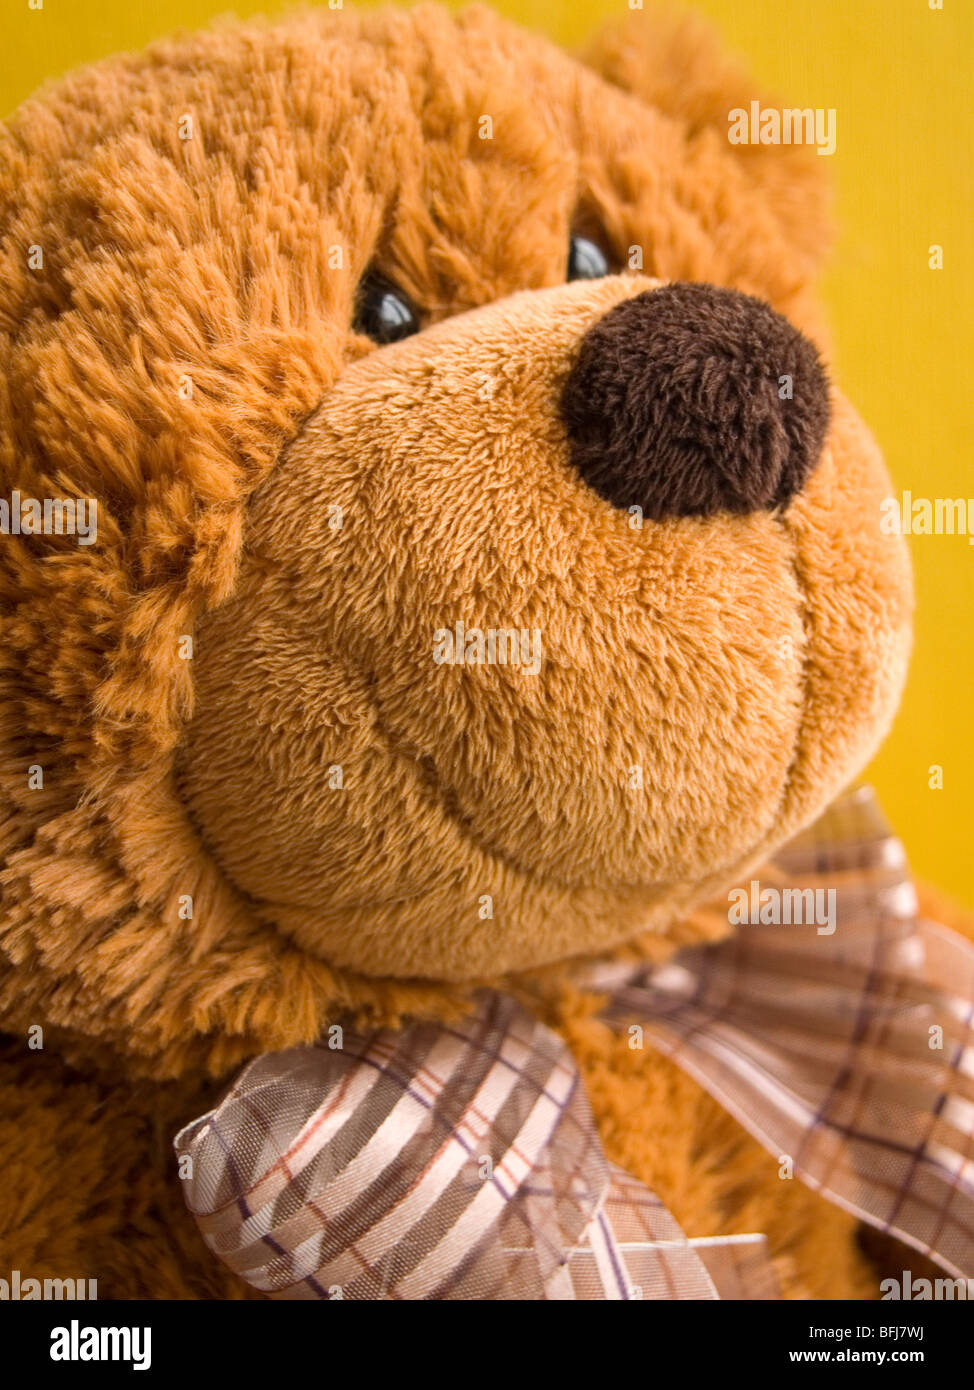 Close up of a soft cuddly brown teddy bear. Stock Photo